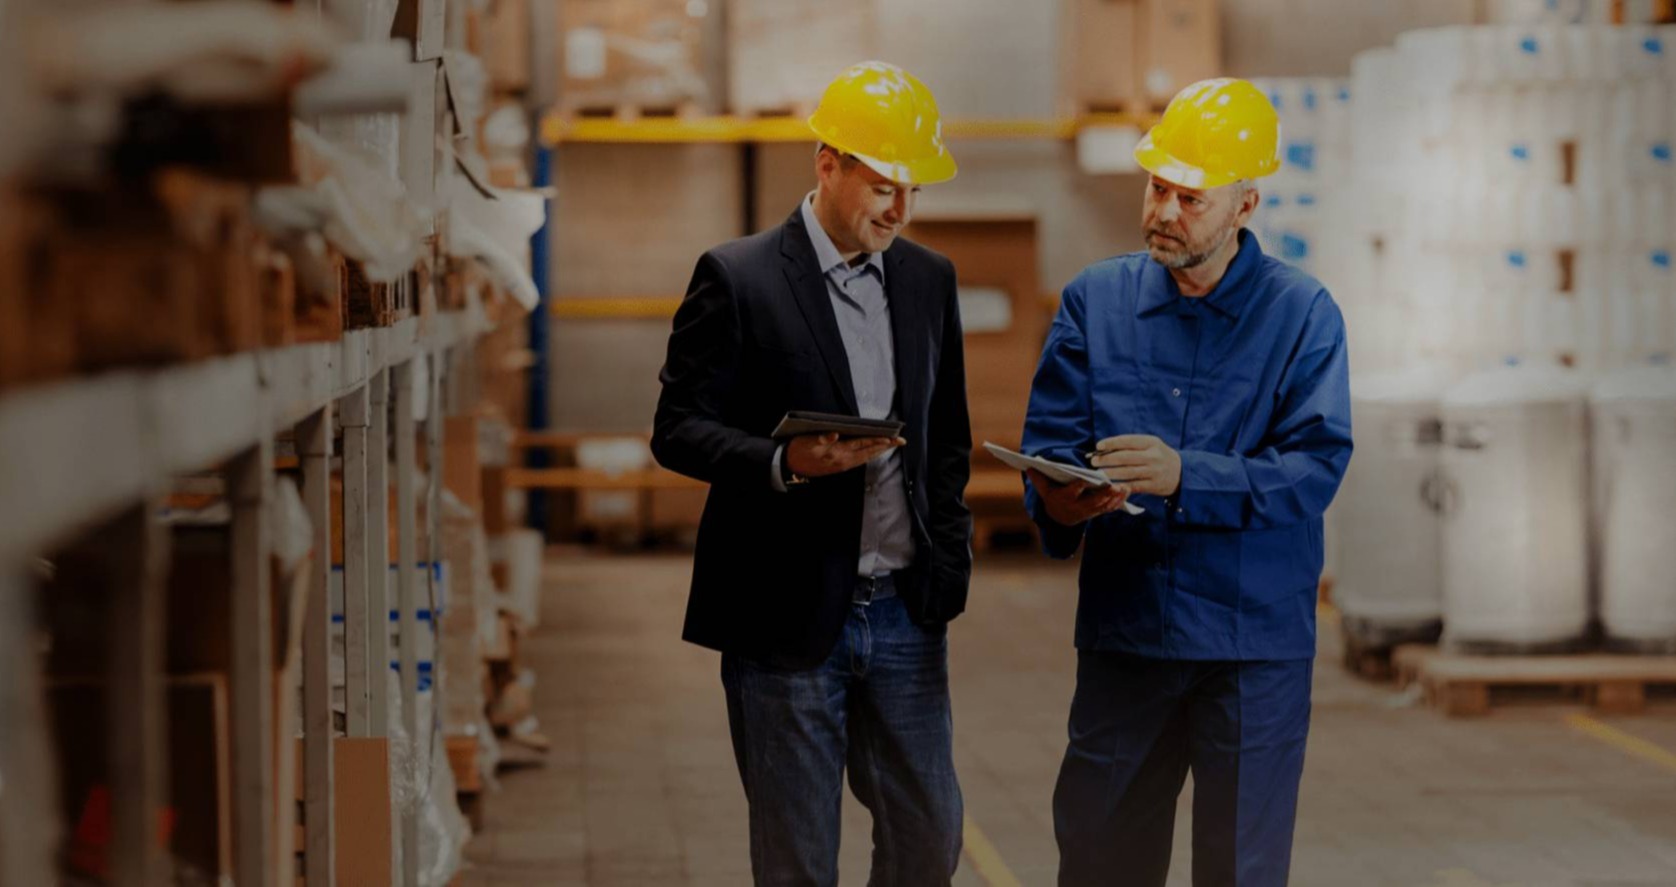 two workers in warehouse with yellow caps